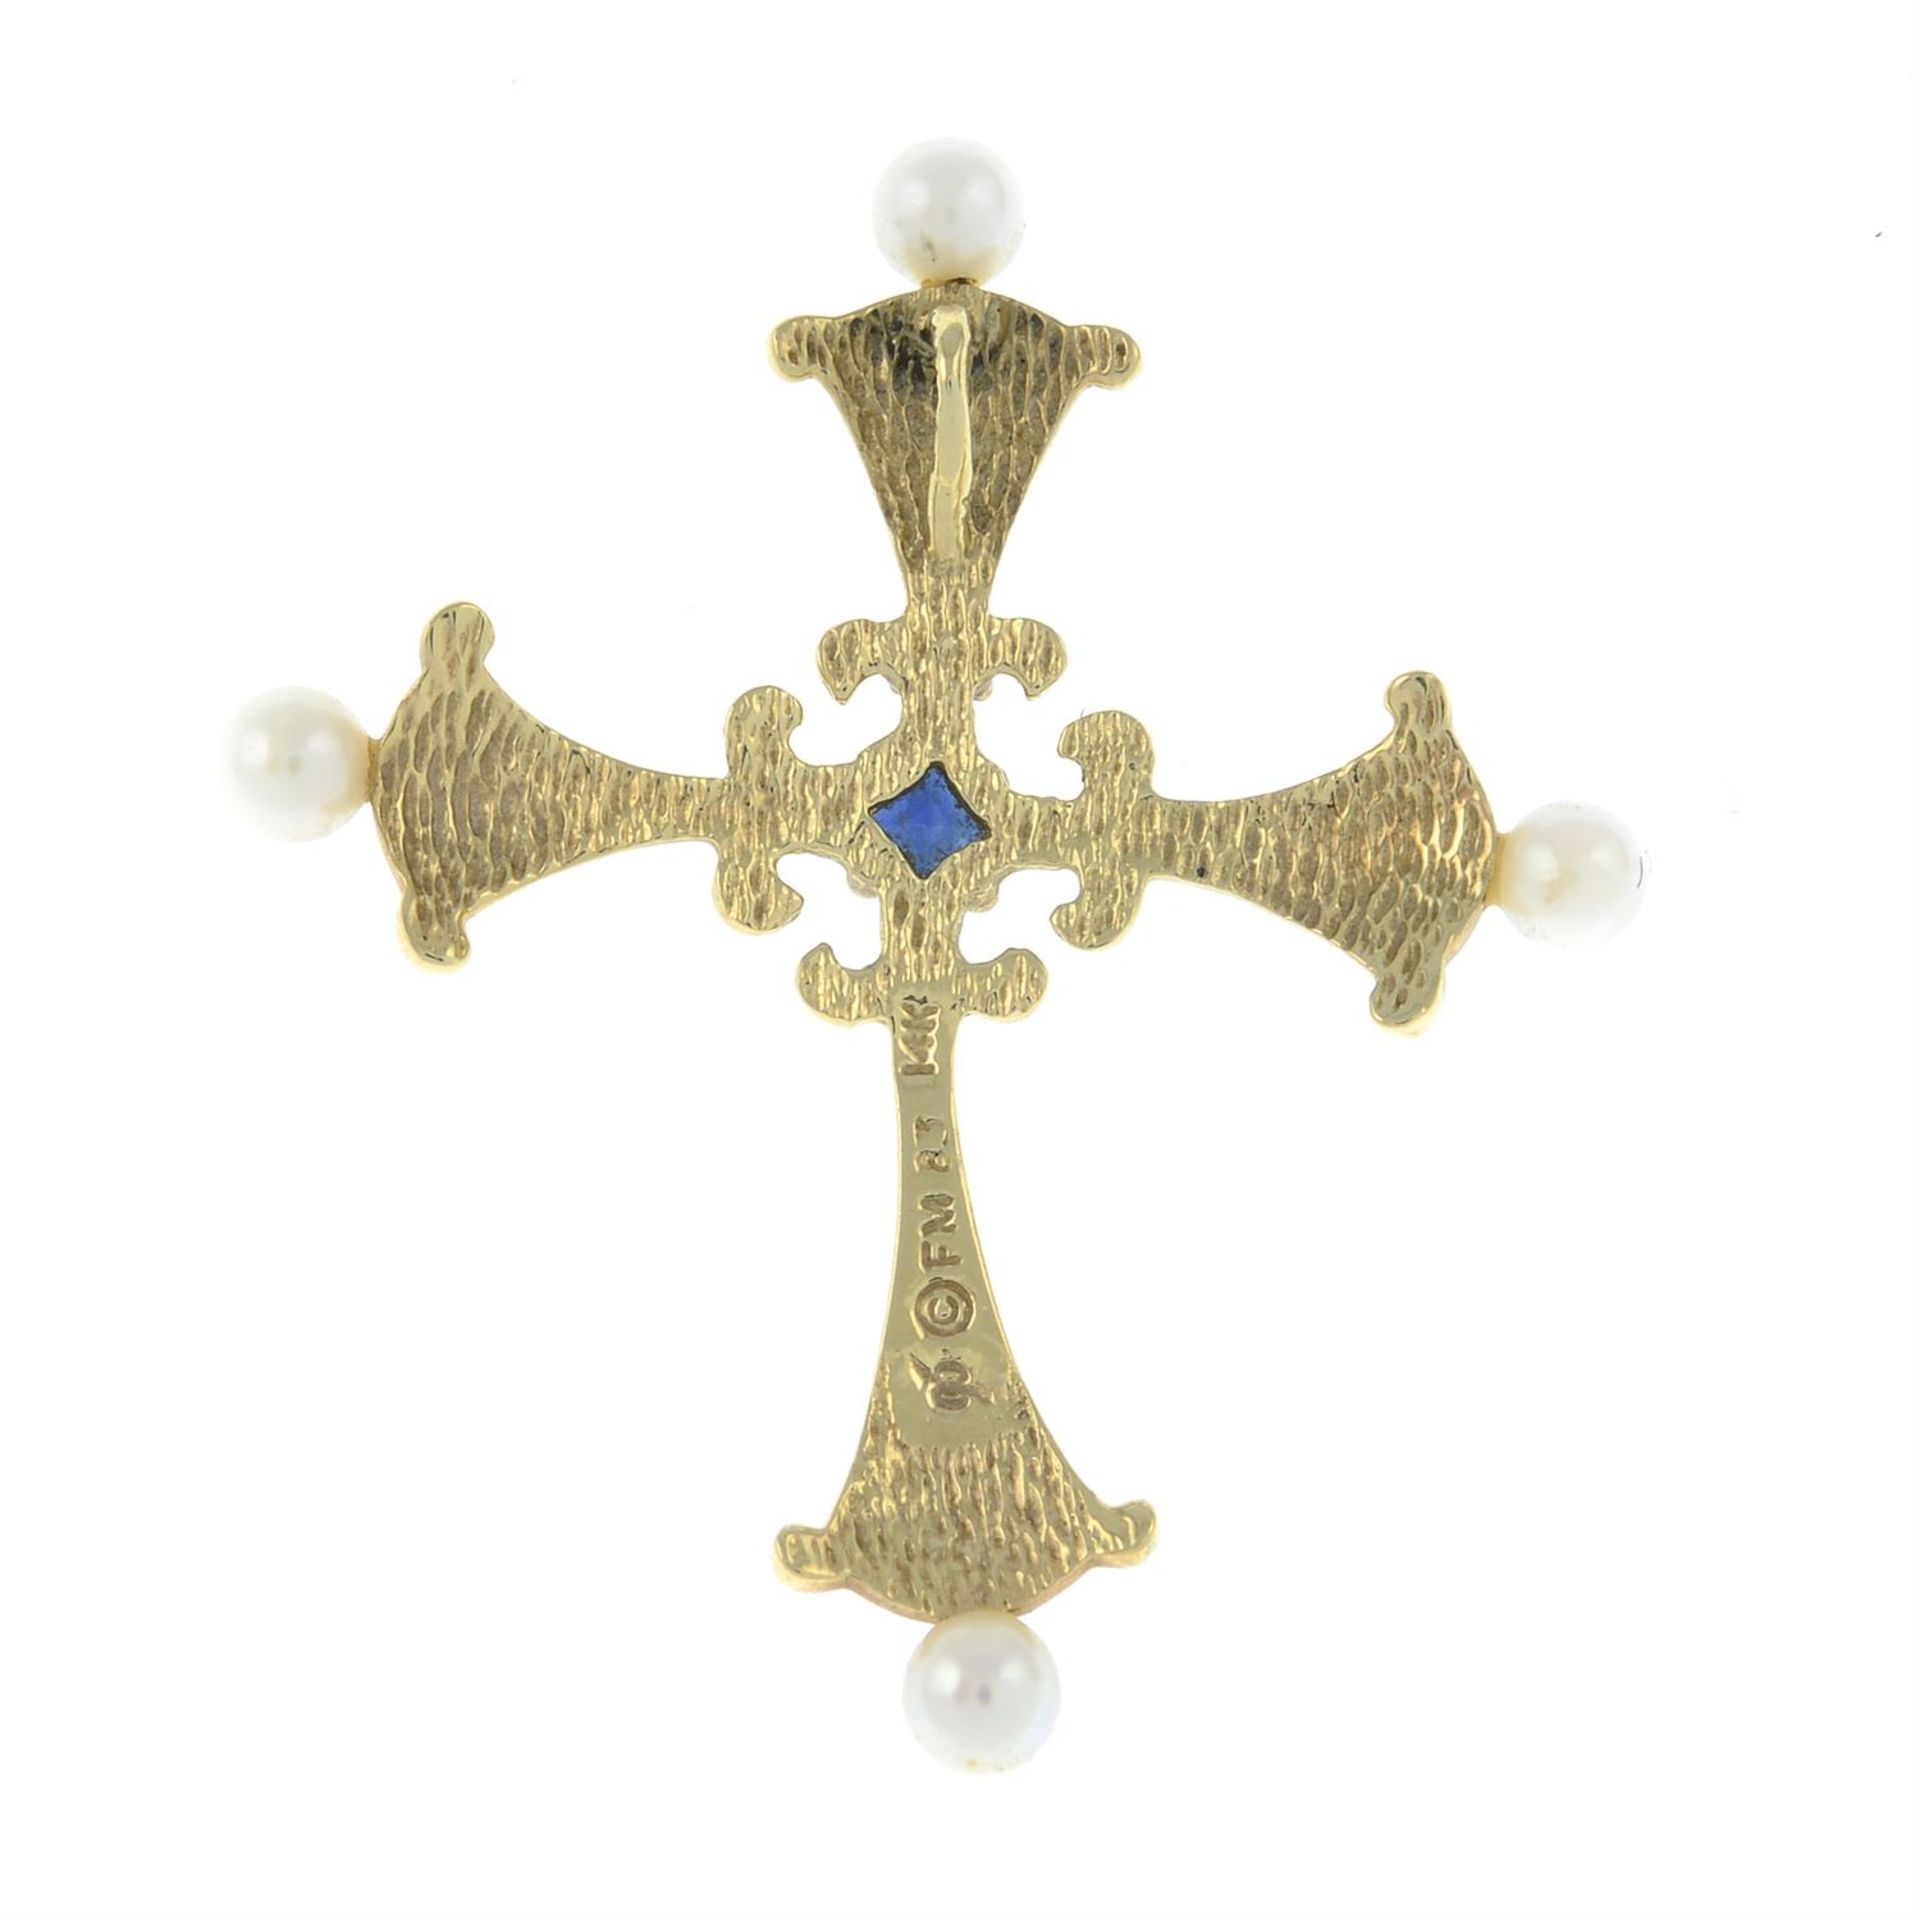 A 14ct gold diamond, sapphire, seed pearl and enamel cross pendant. - Image 2 of 2